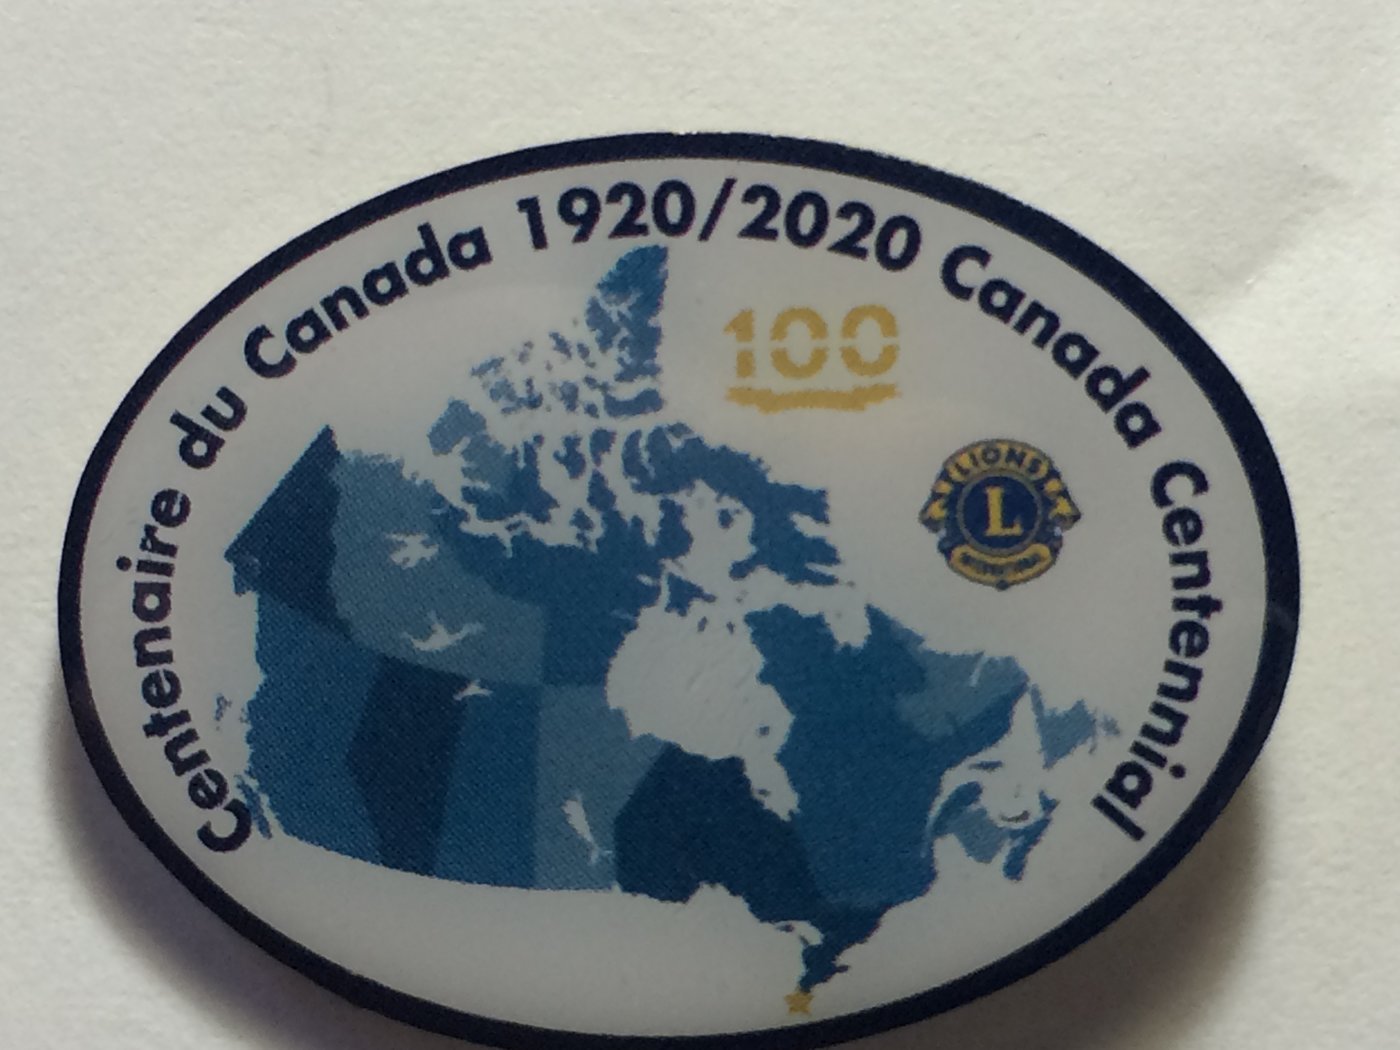 Six thousand Commemorative Friendship Pins are already in circulation in Canada to celebrate the centennial. More are being offered through district governors and representatives for CAN$2 each or 3 for CAN$5.